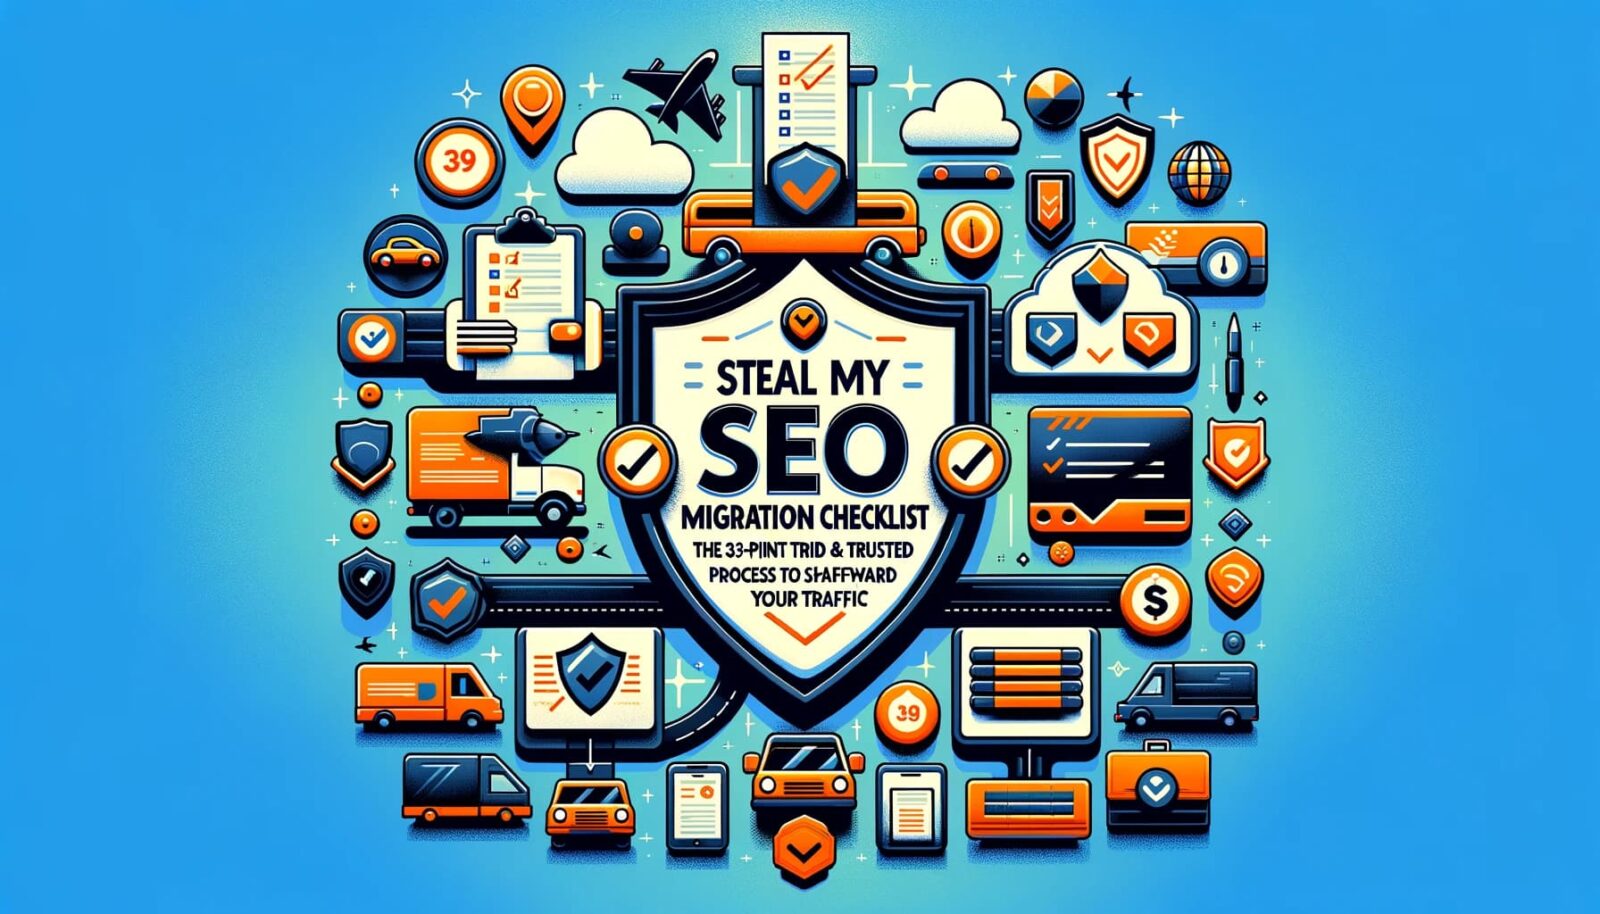 “Steal My SEO Migration Checklist_ The 39-Point Tried & Trusted Process to Safeguard Your Traffic